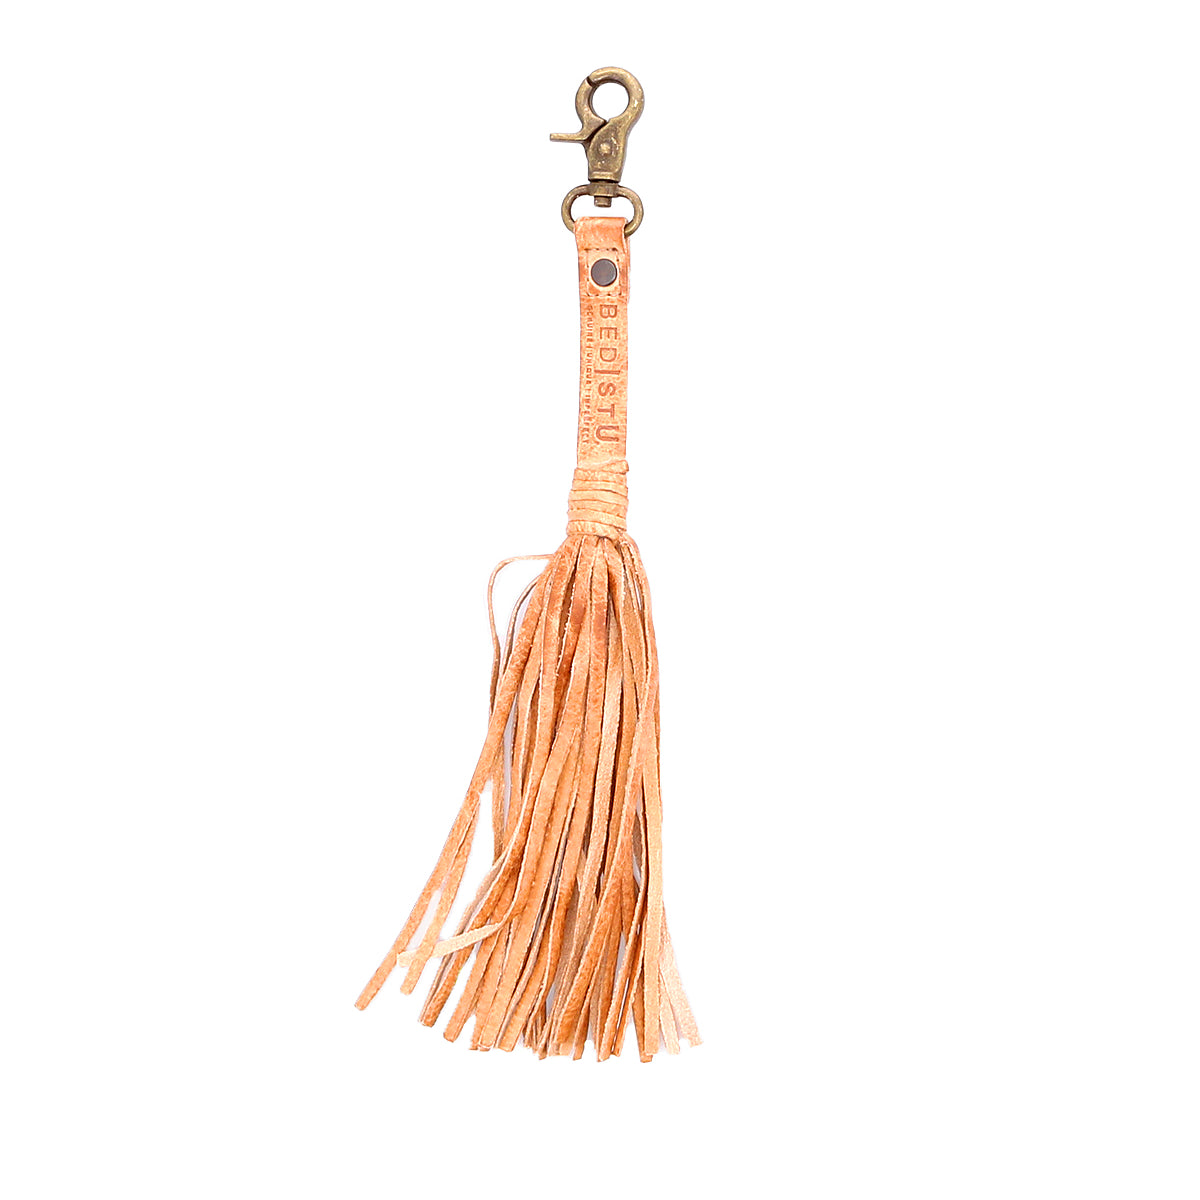 An accessory that allows for personal expression, the Bed Stu peach leather key chain features a stylish Tassel Clip.